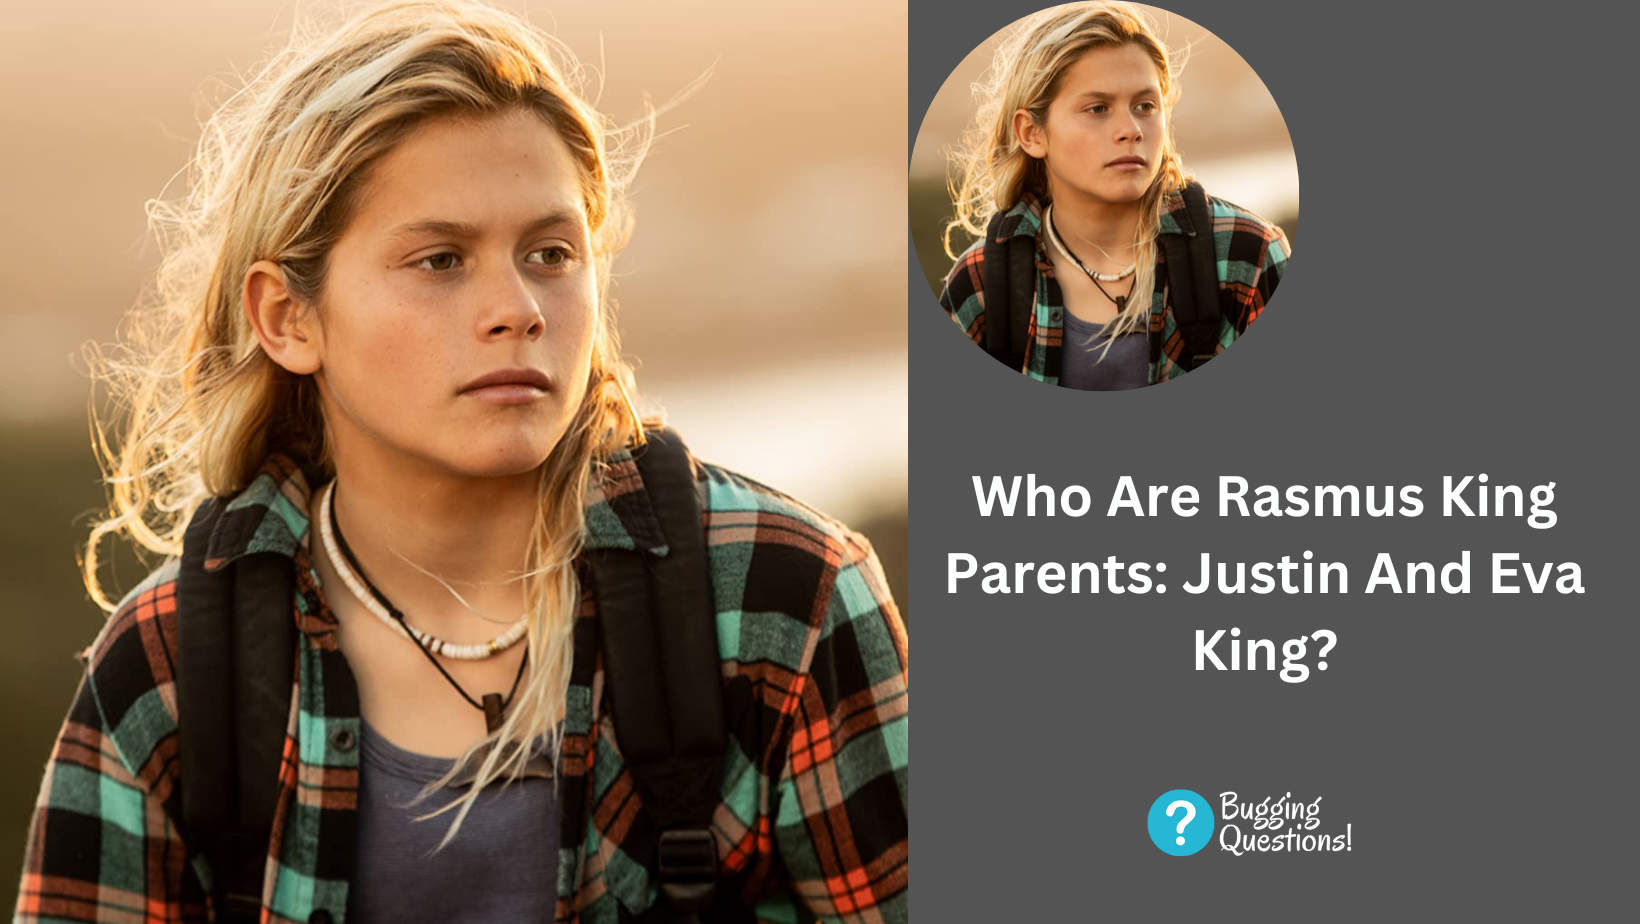 Who Are Rasmus King Parents: Justin And Eva King?